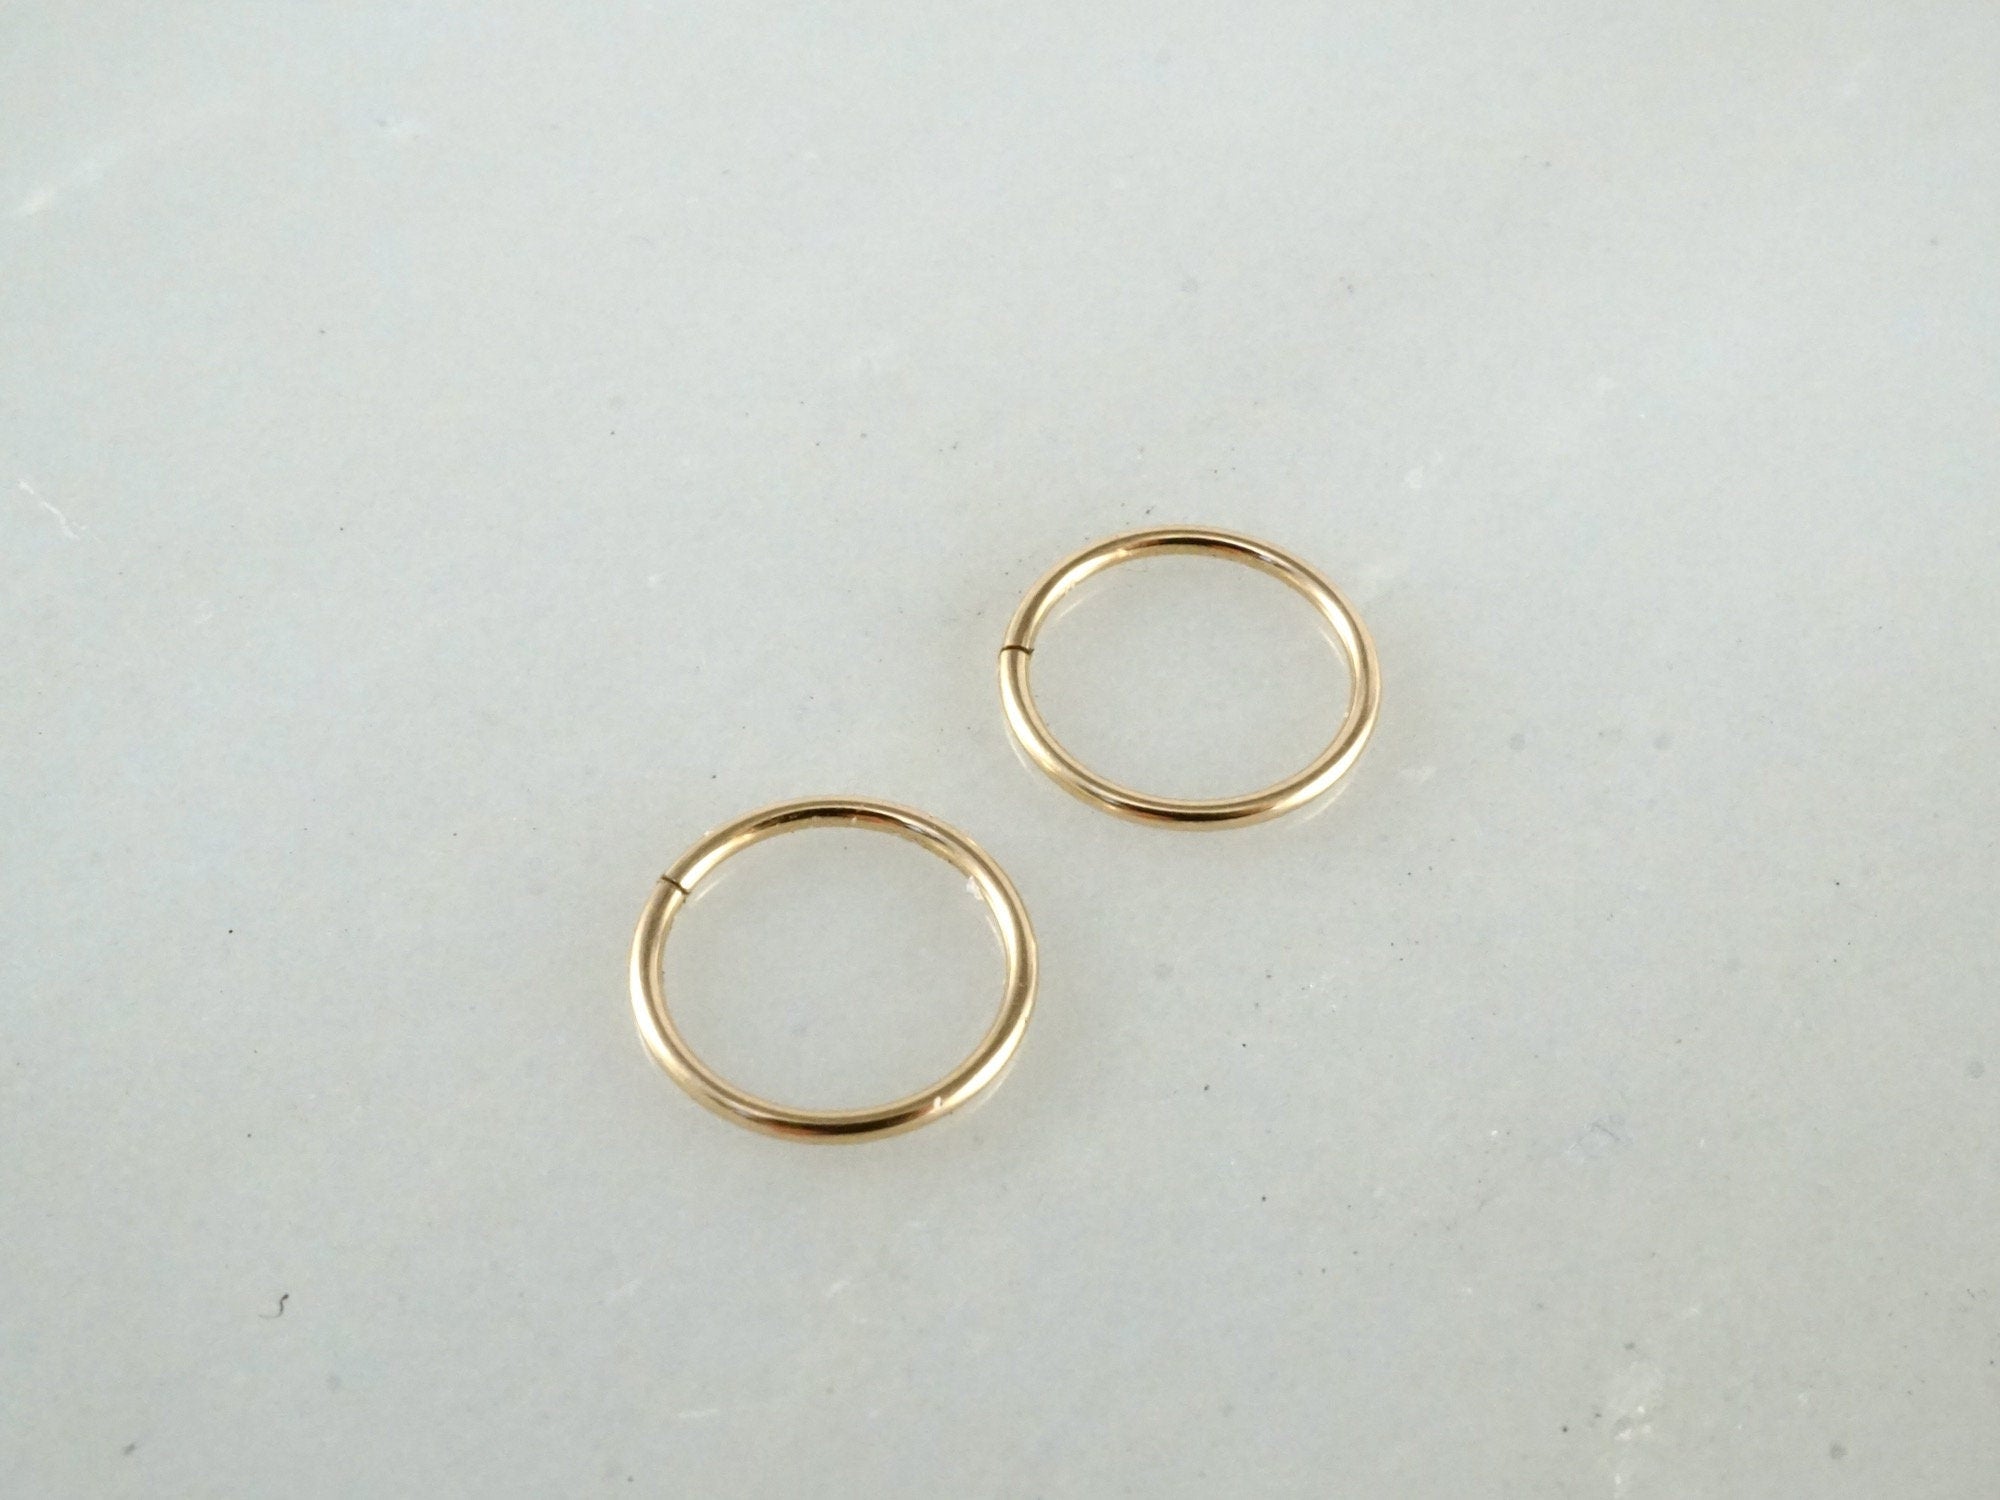 14K Gold Filled Mini Hoops - Two Sets of Earrings  | 20g Small Gold Silver Hoops | Sleepers | Nose Rings | Cartilage Hoops